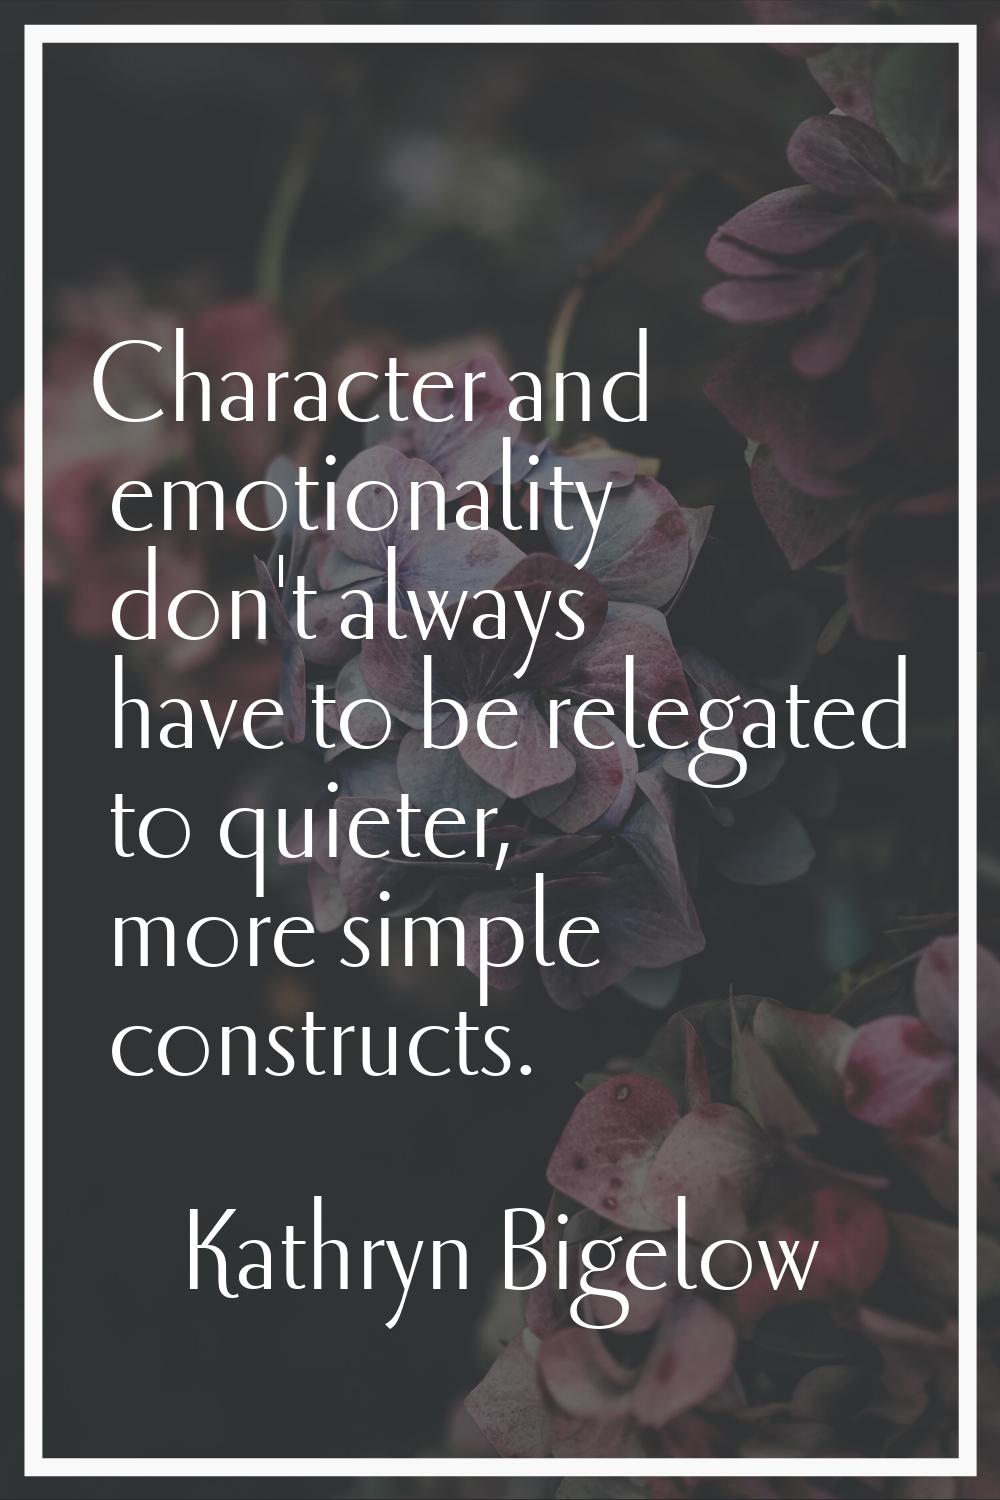 Character and emotionality don't always have to be relegated to quieter, more simple constructs.